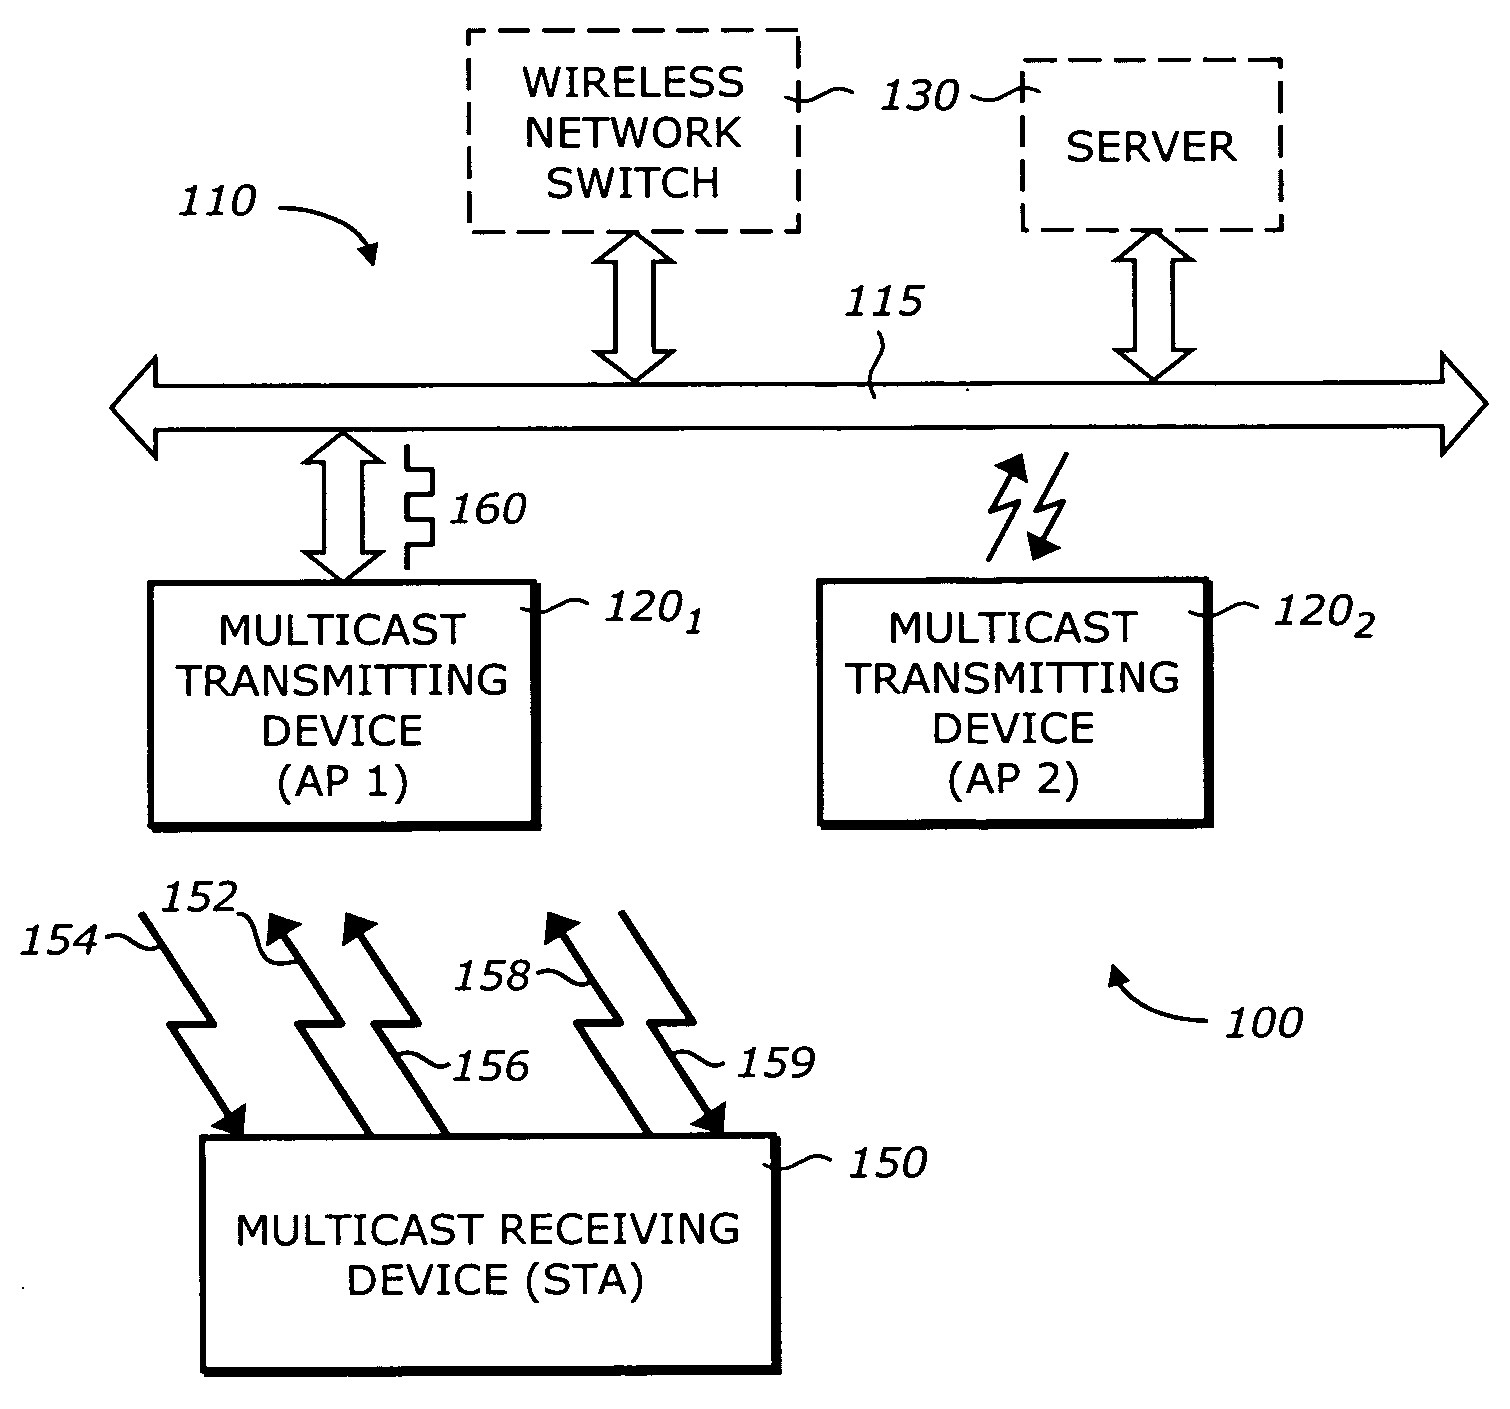 System and method for reliable multicast over shared wireless media for spectrum efficiency and battery power conservation